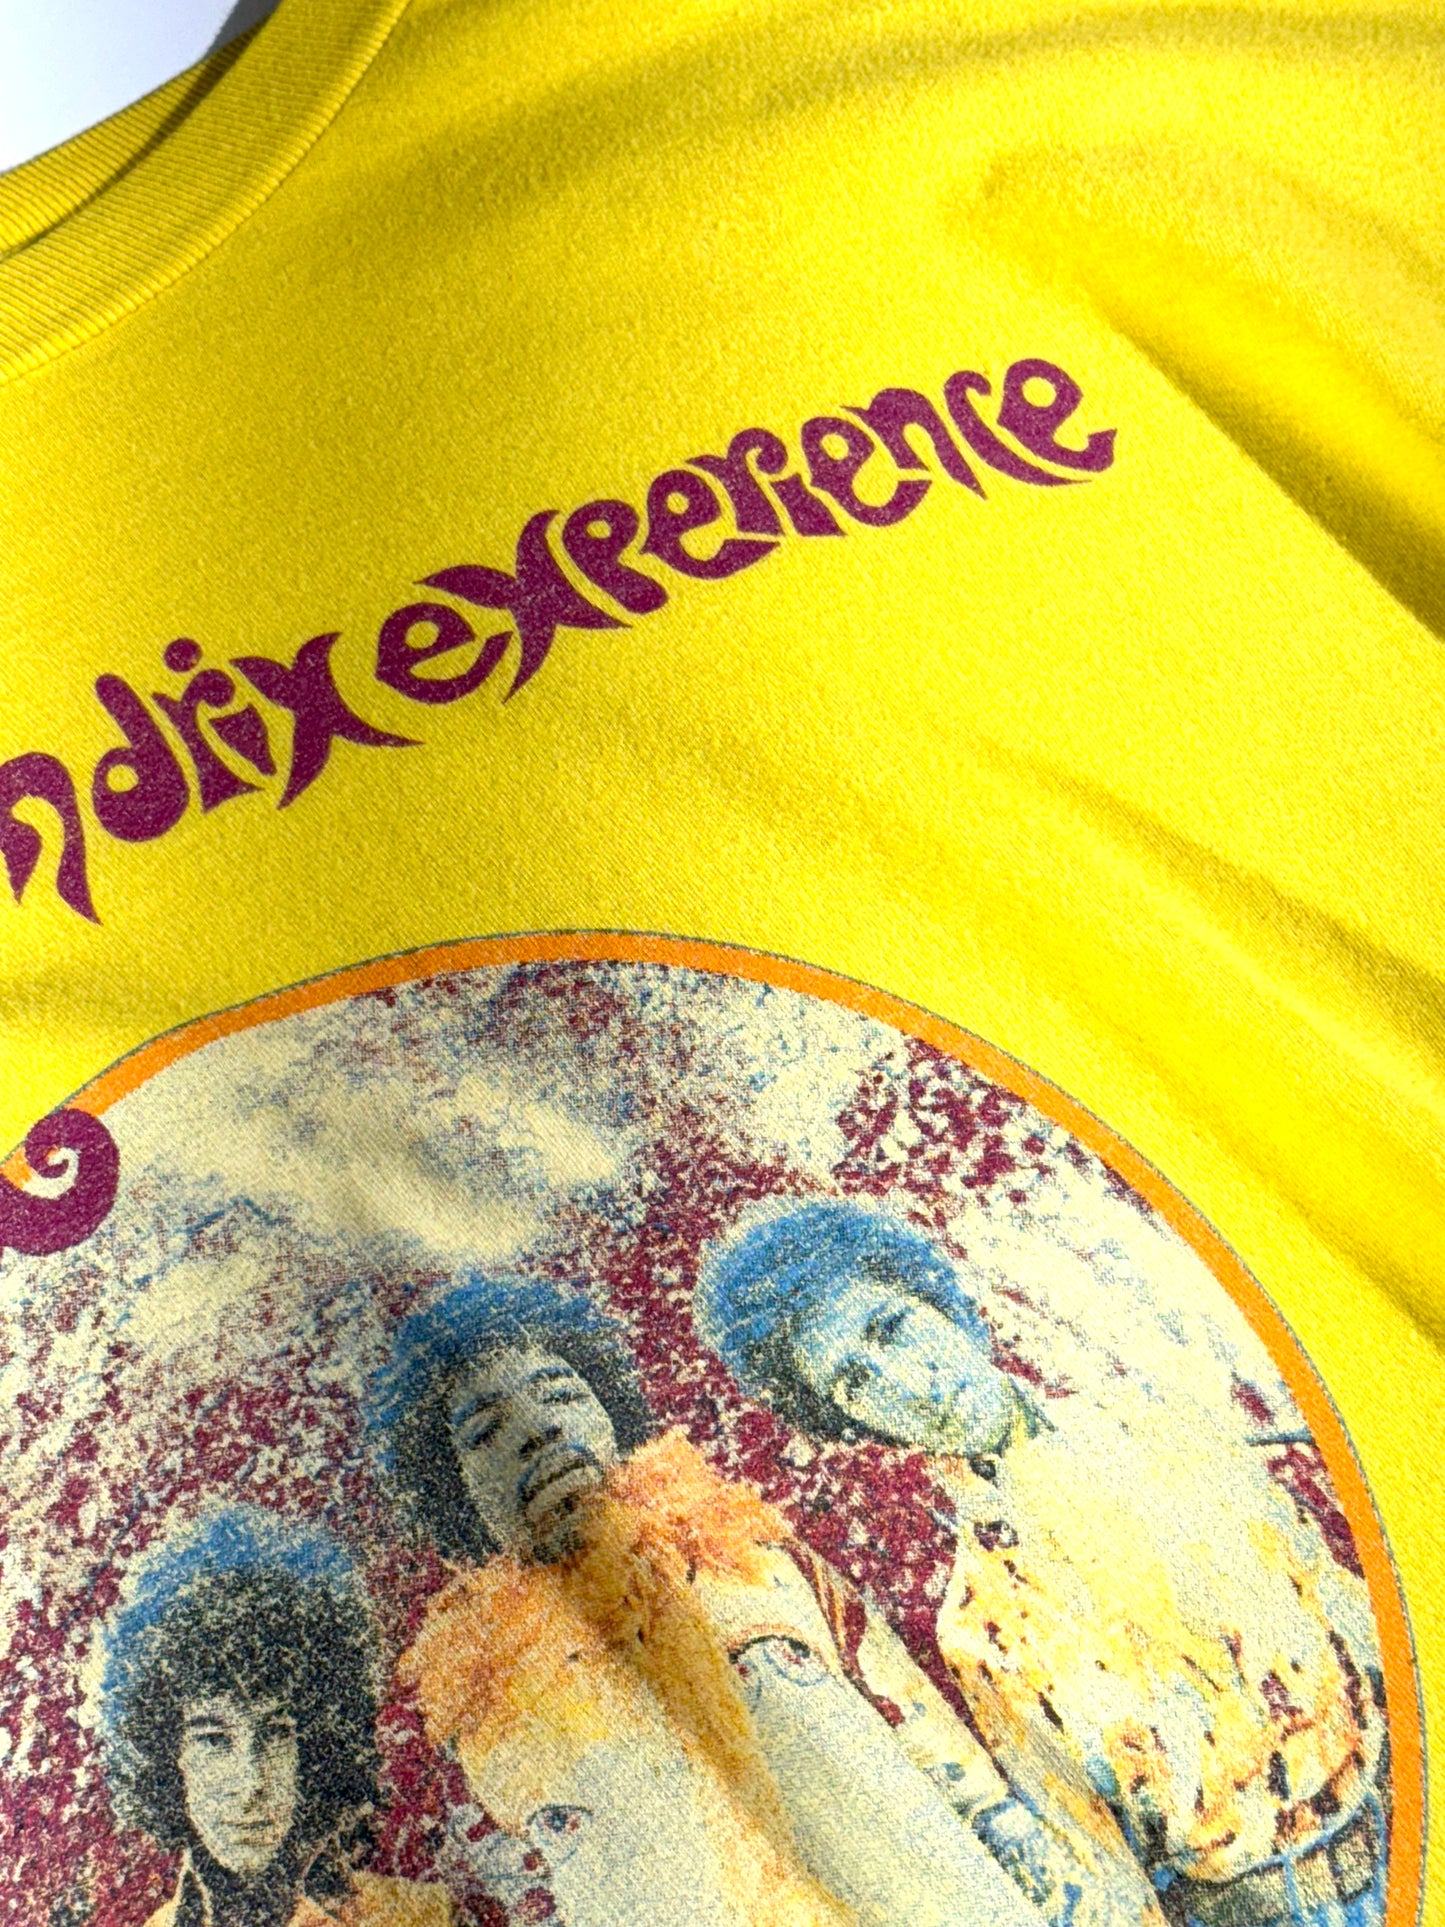 Vintage Jimi Hendrix T-Shirt Are You Experienced Band Tee